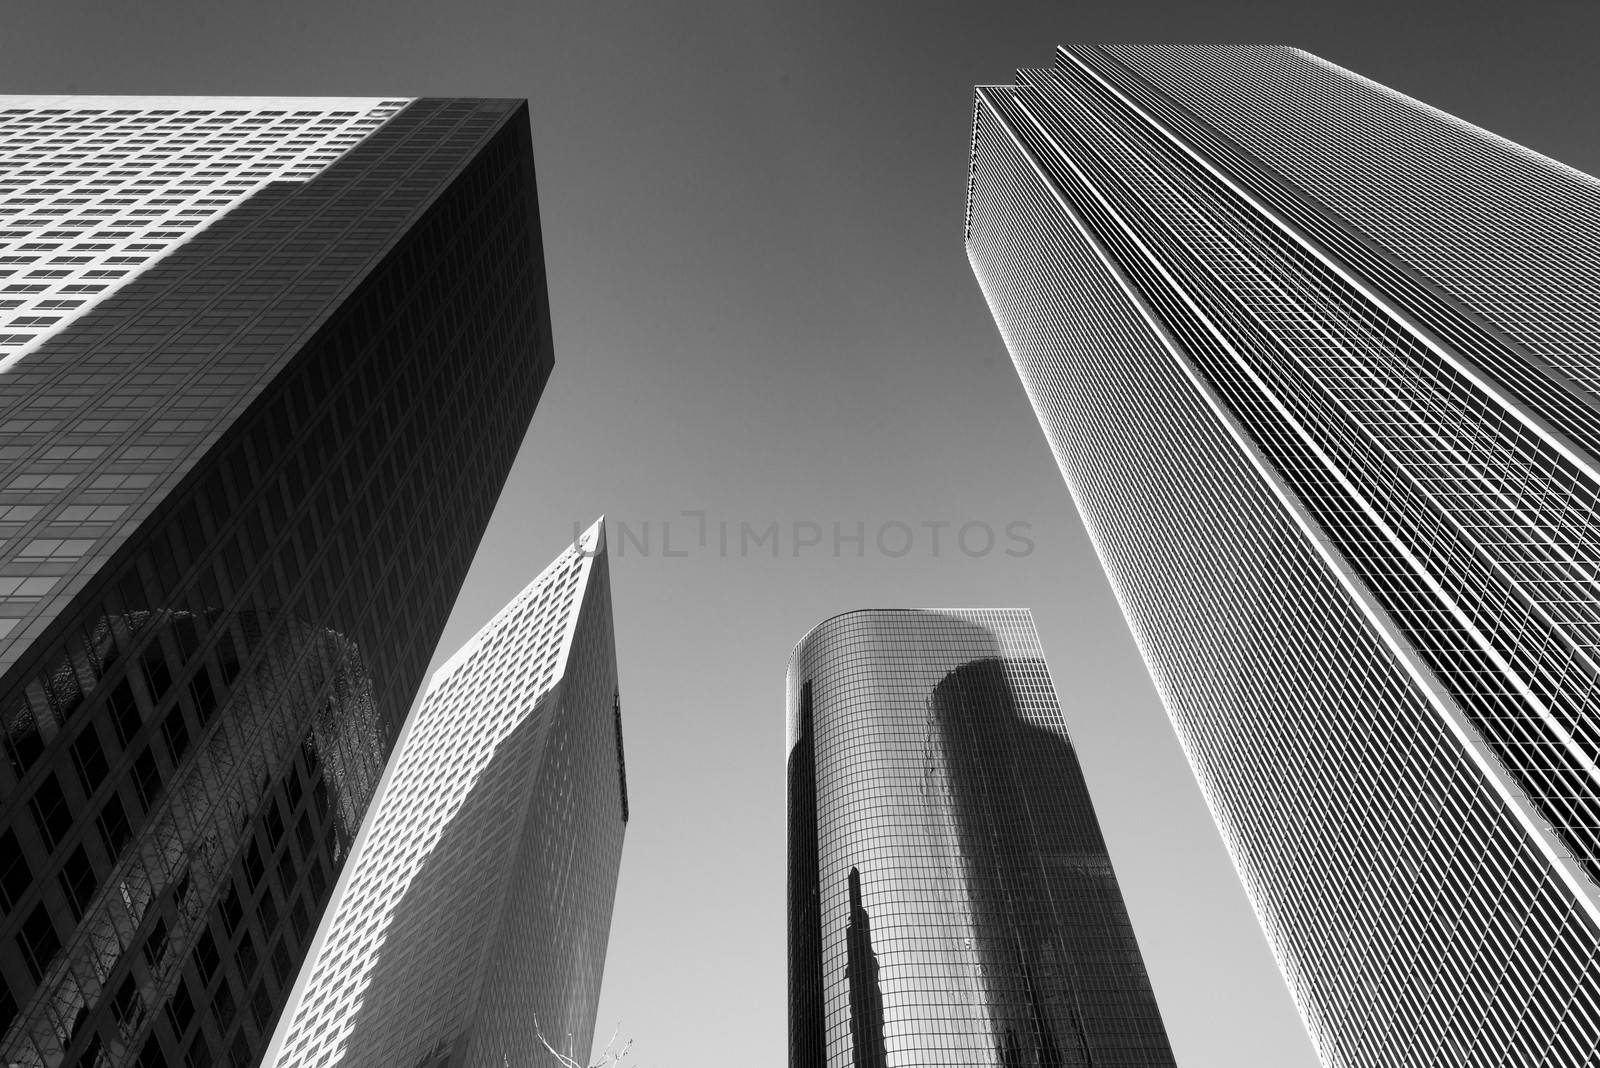 Los Angeles architecture by CelsoDiniz